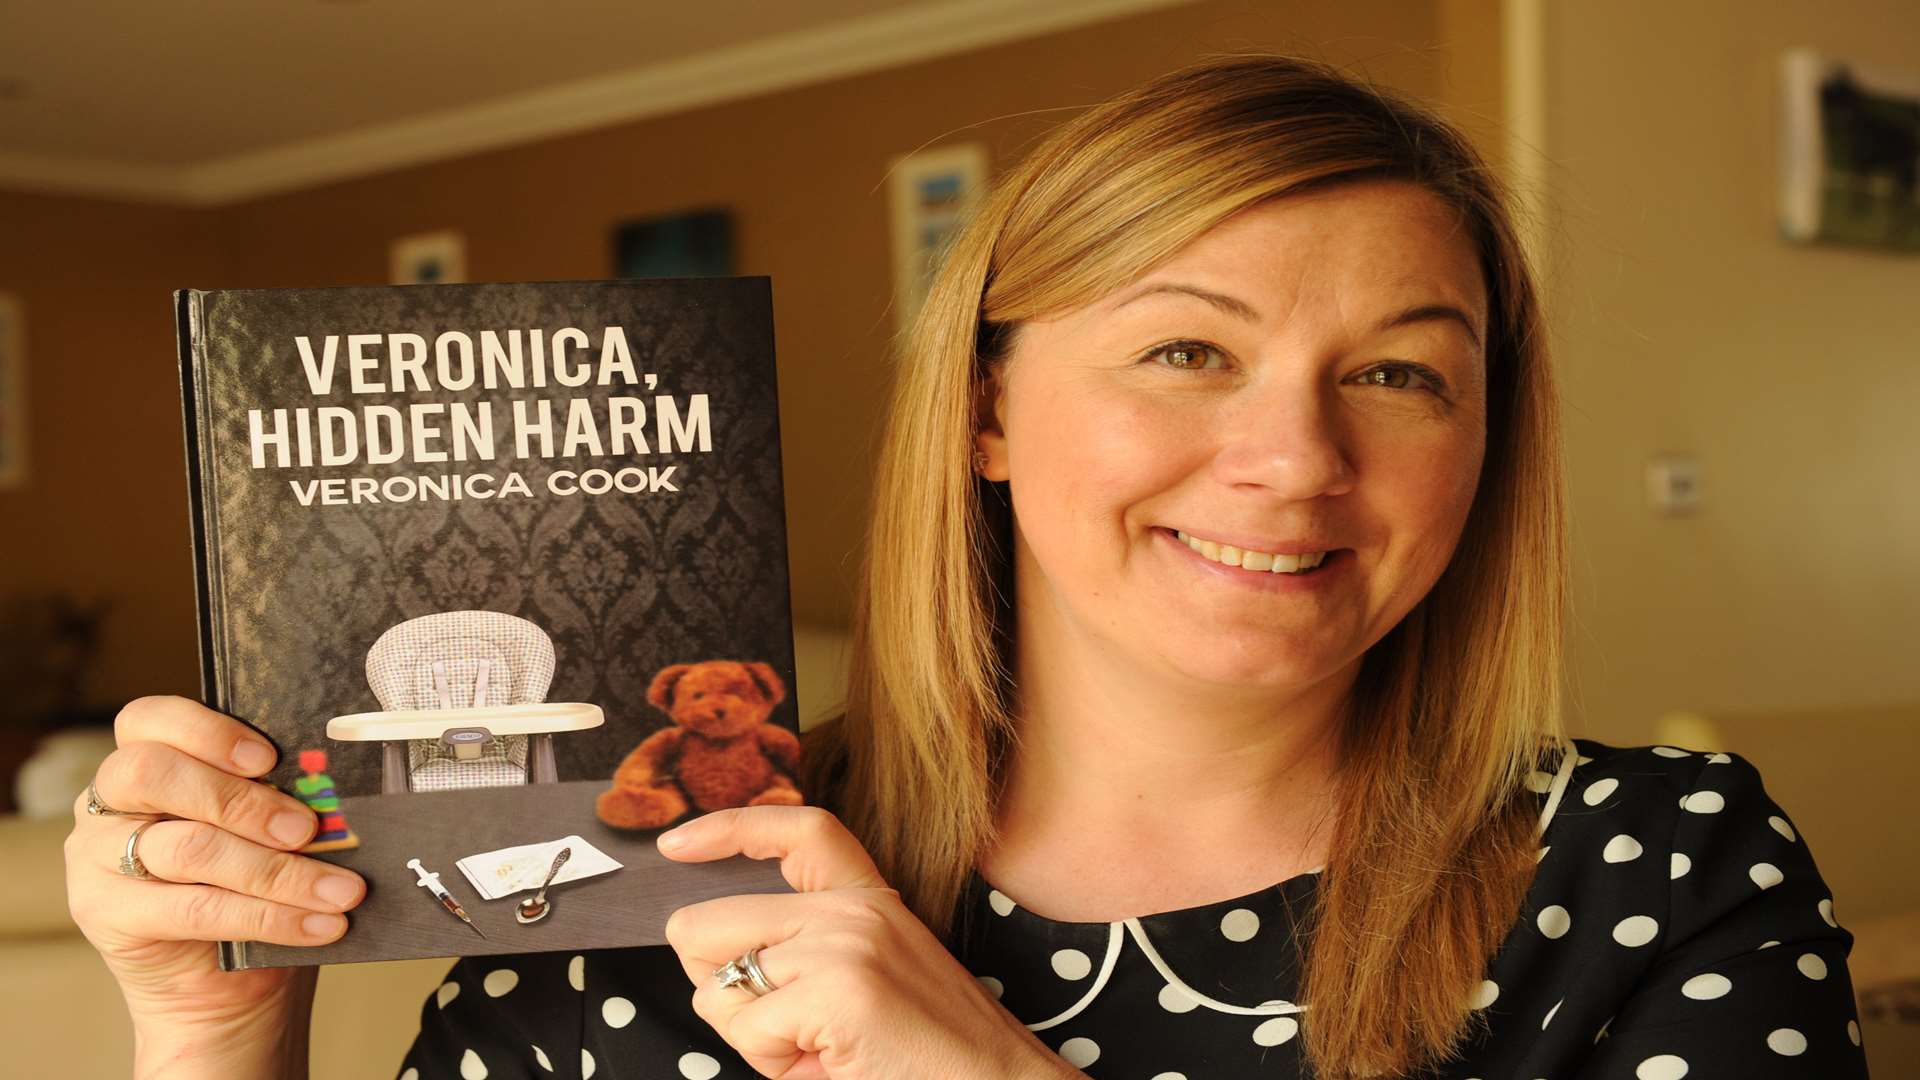 Veronica Cook with her book